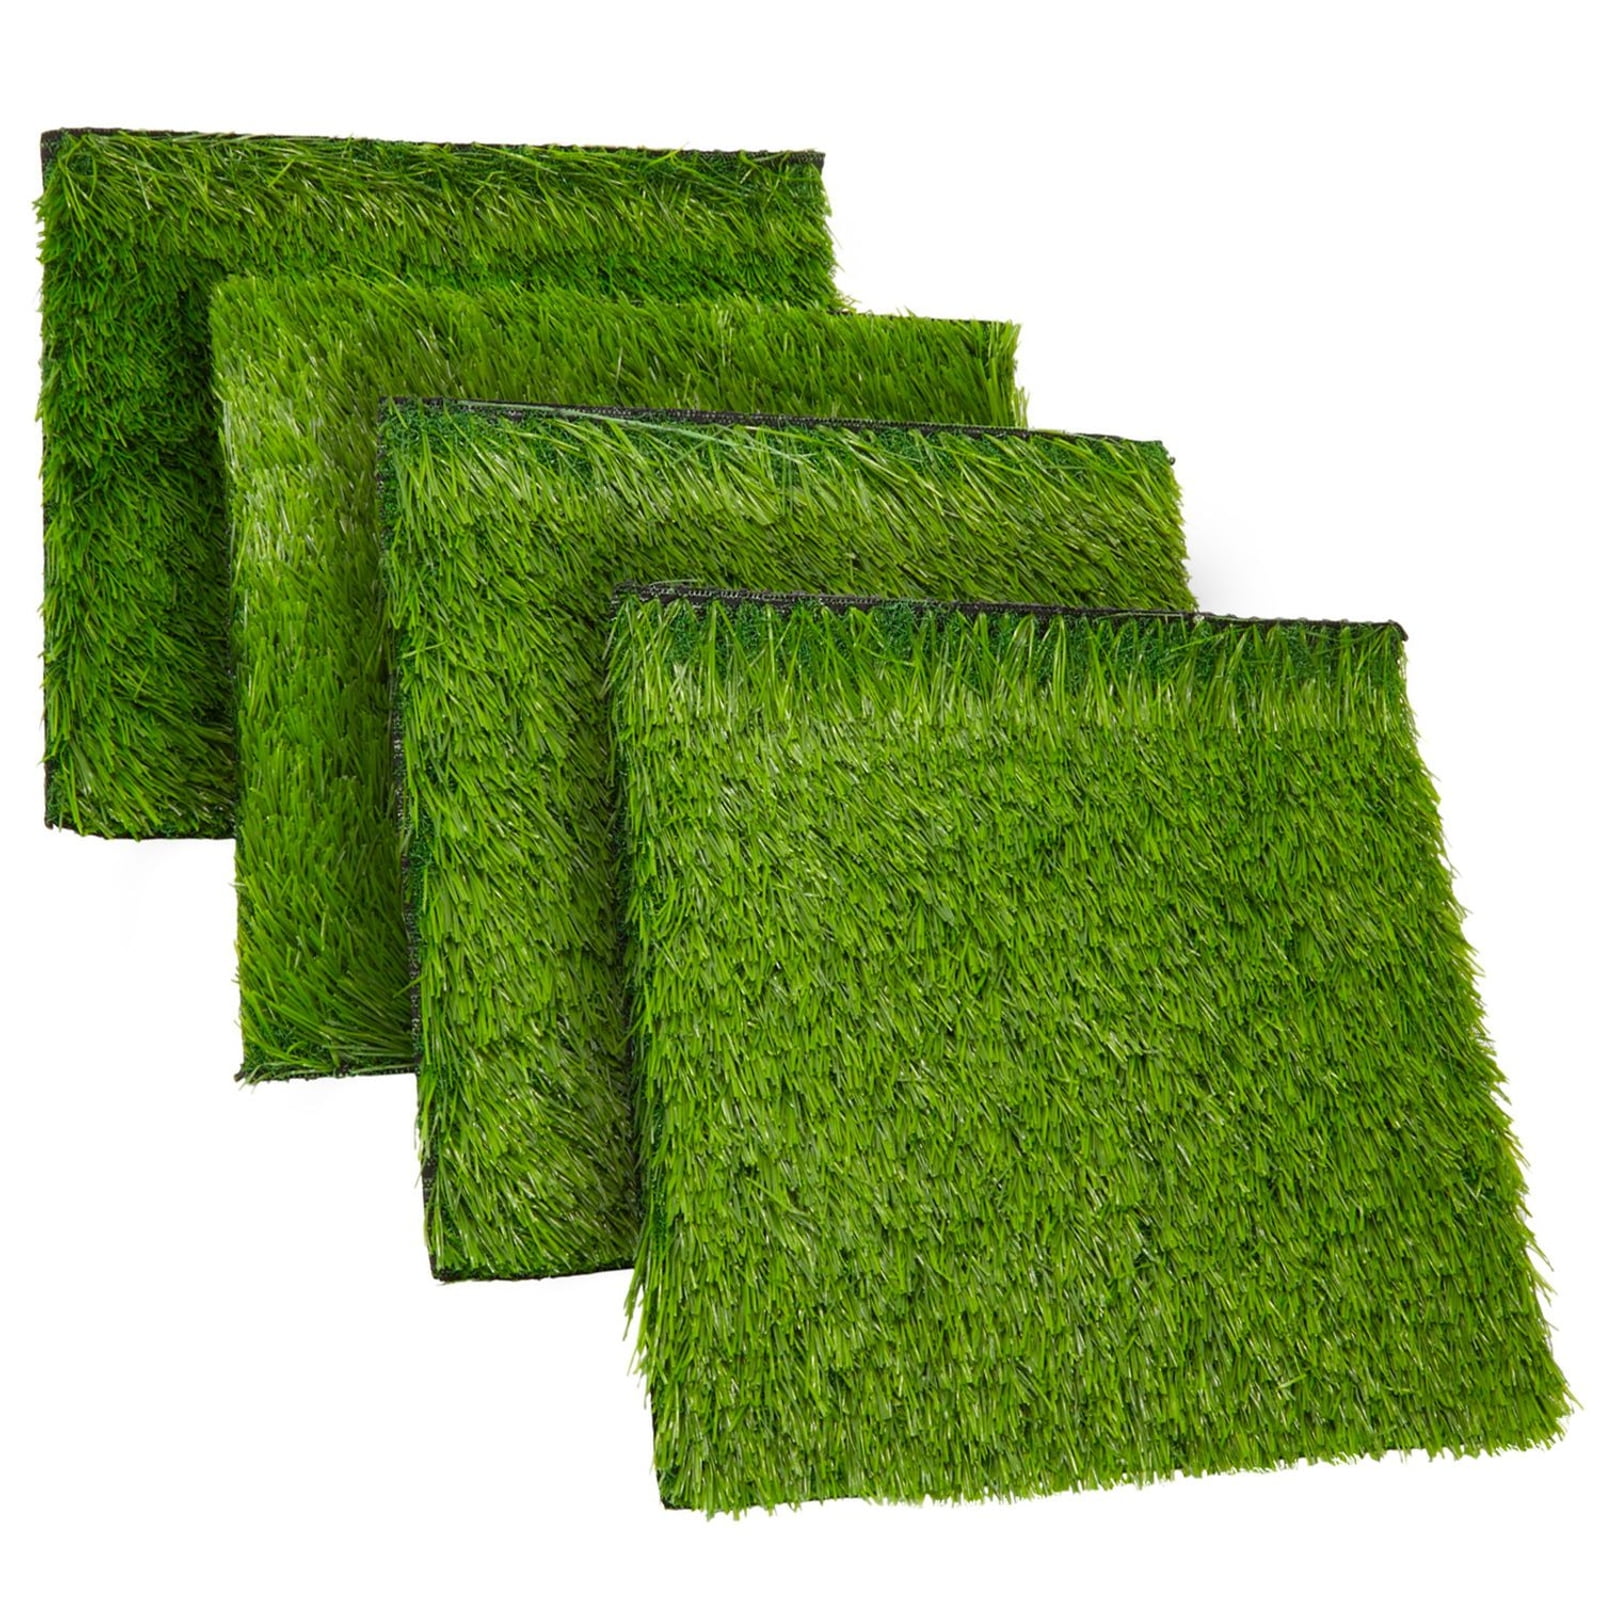 Trend Niet verwacht Toestemming 4 Pack Artificial Grass Mat Squares, 12x12 In Fake Turf Tiles for Balcony  and Patio Decor, Placemats and DIY Crafts - Walmart.com